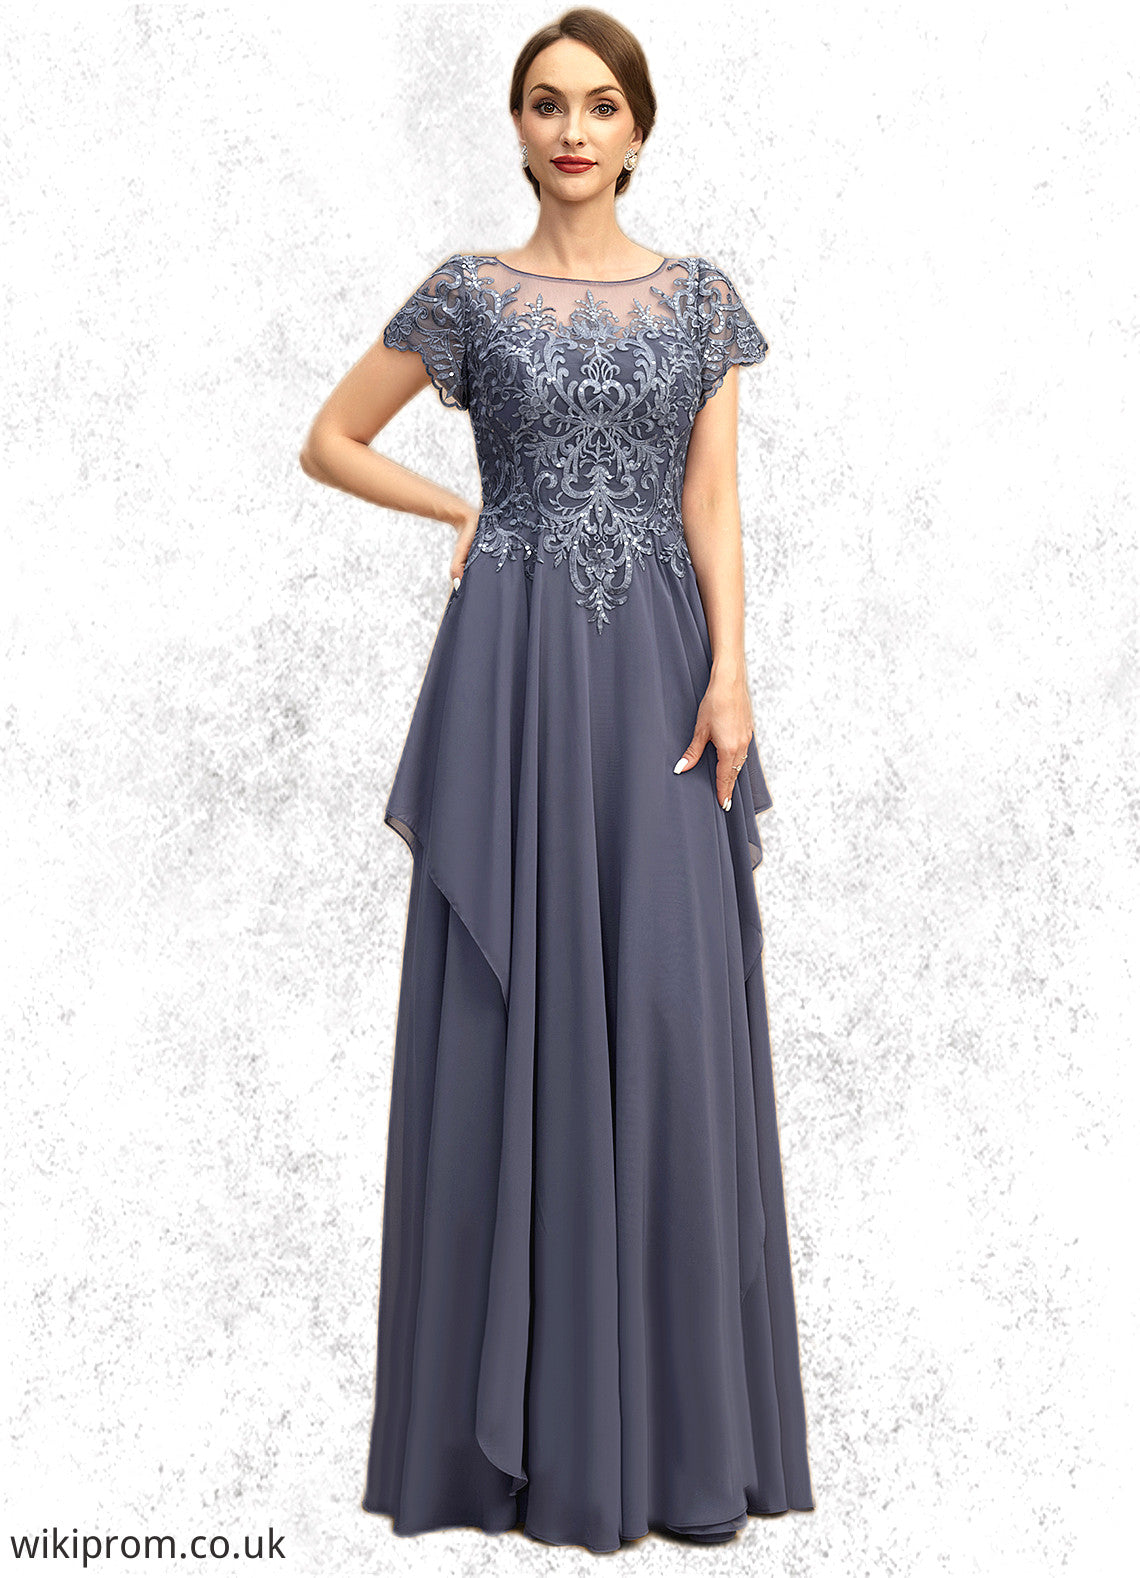 Pam A-line Scoop Illusion Floor-Length Chiffon Lace Mother of the Bride Dress With Cascading Ruffles Sequins SWK126P0021897